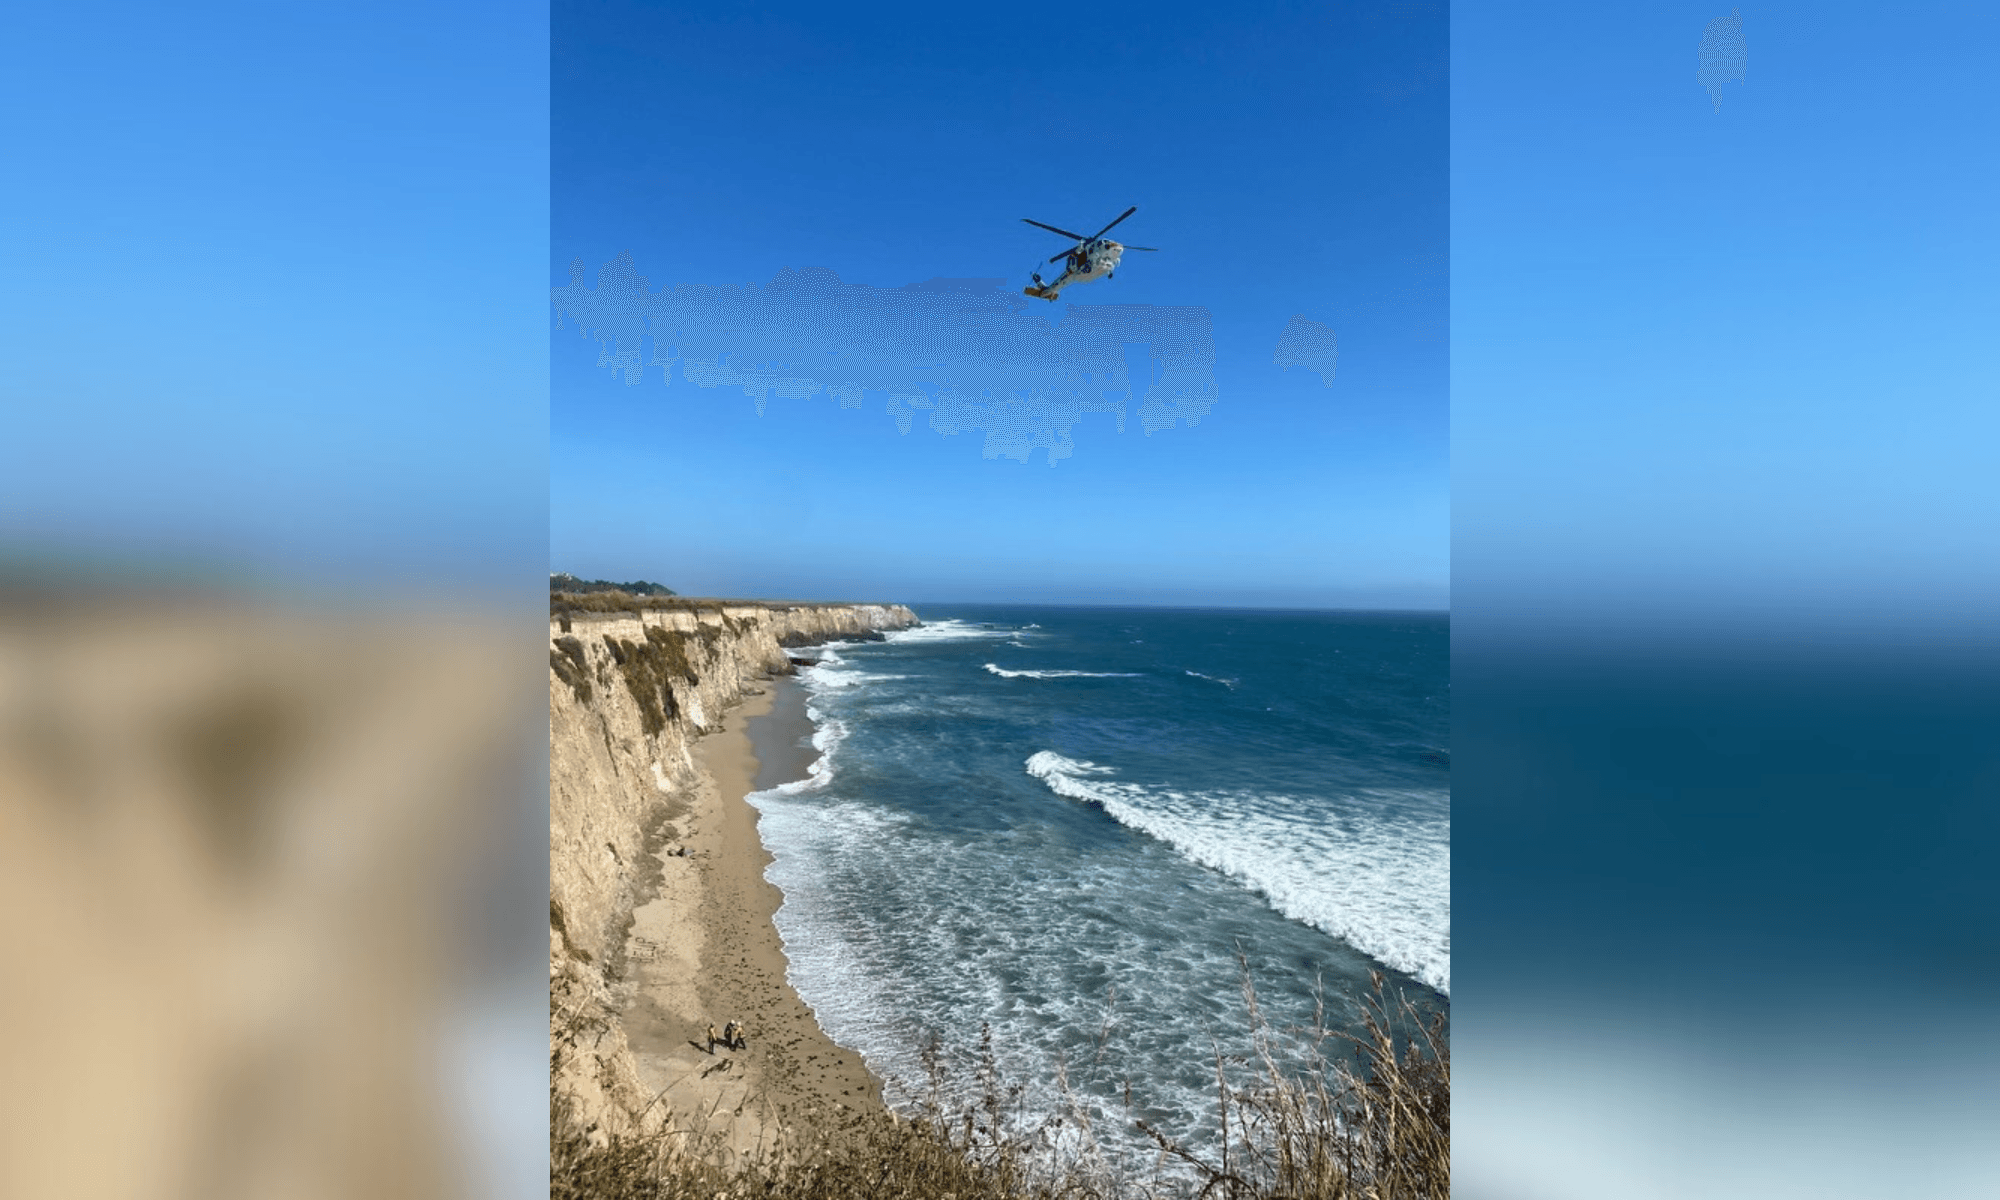 Stranded Kite Surfer Rescued From California Beach After Spelling ‘Help’ With Rocks